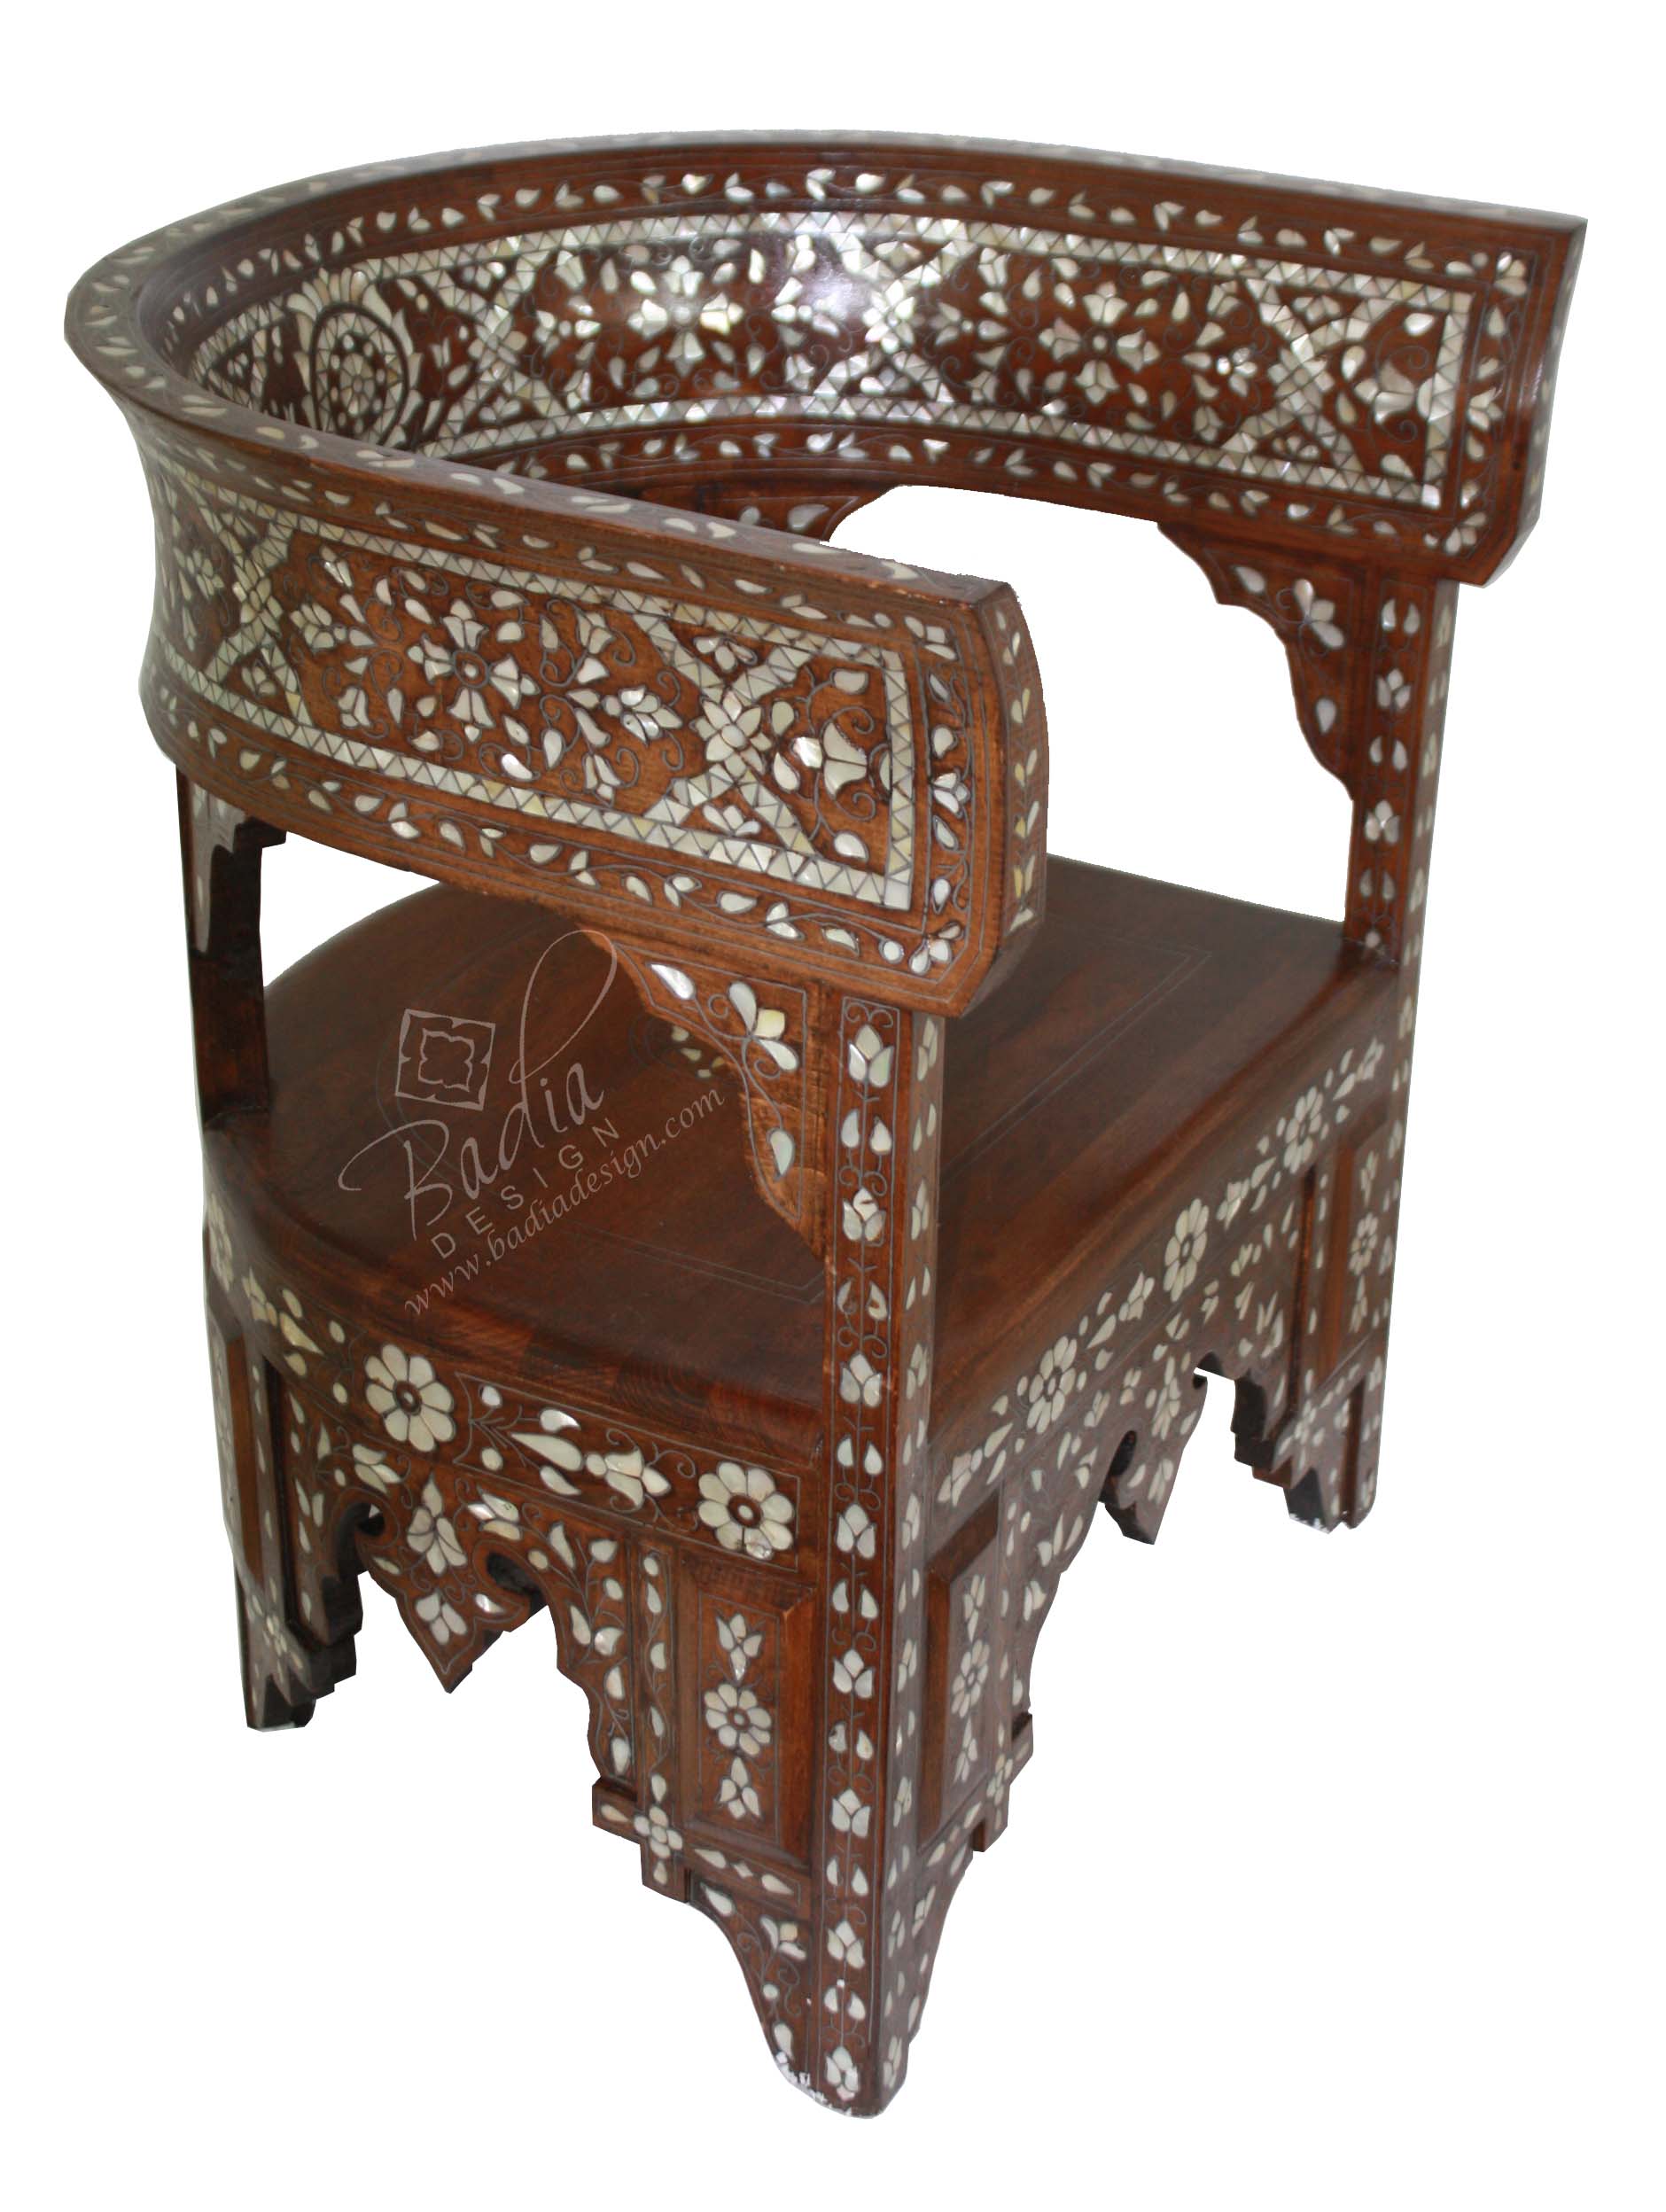 moroccan-mother-of-pearl-inlaid-chair-mop-ch024-2.jpg